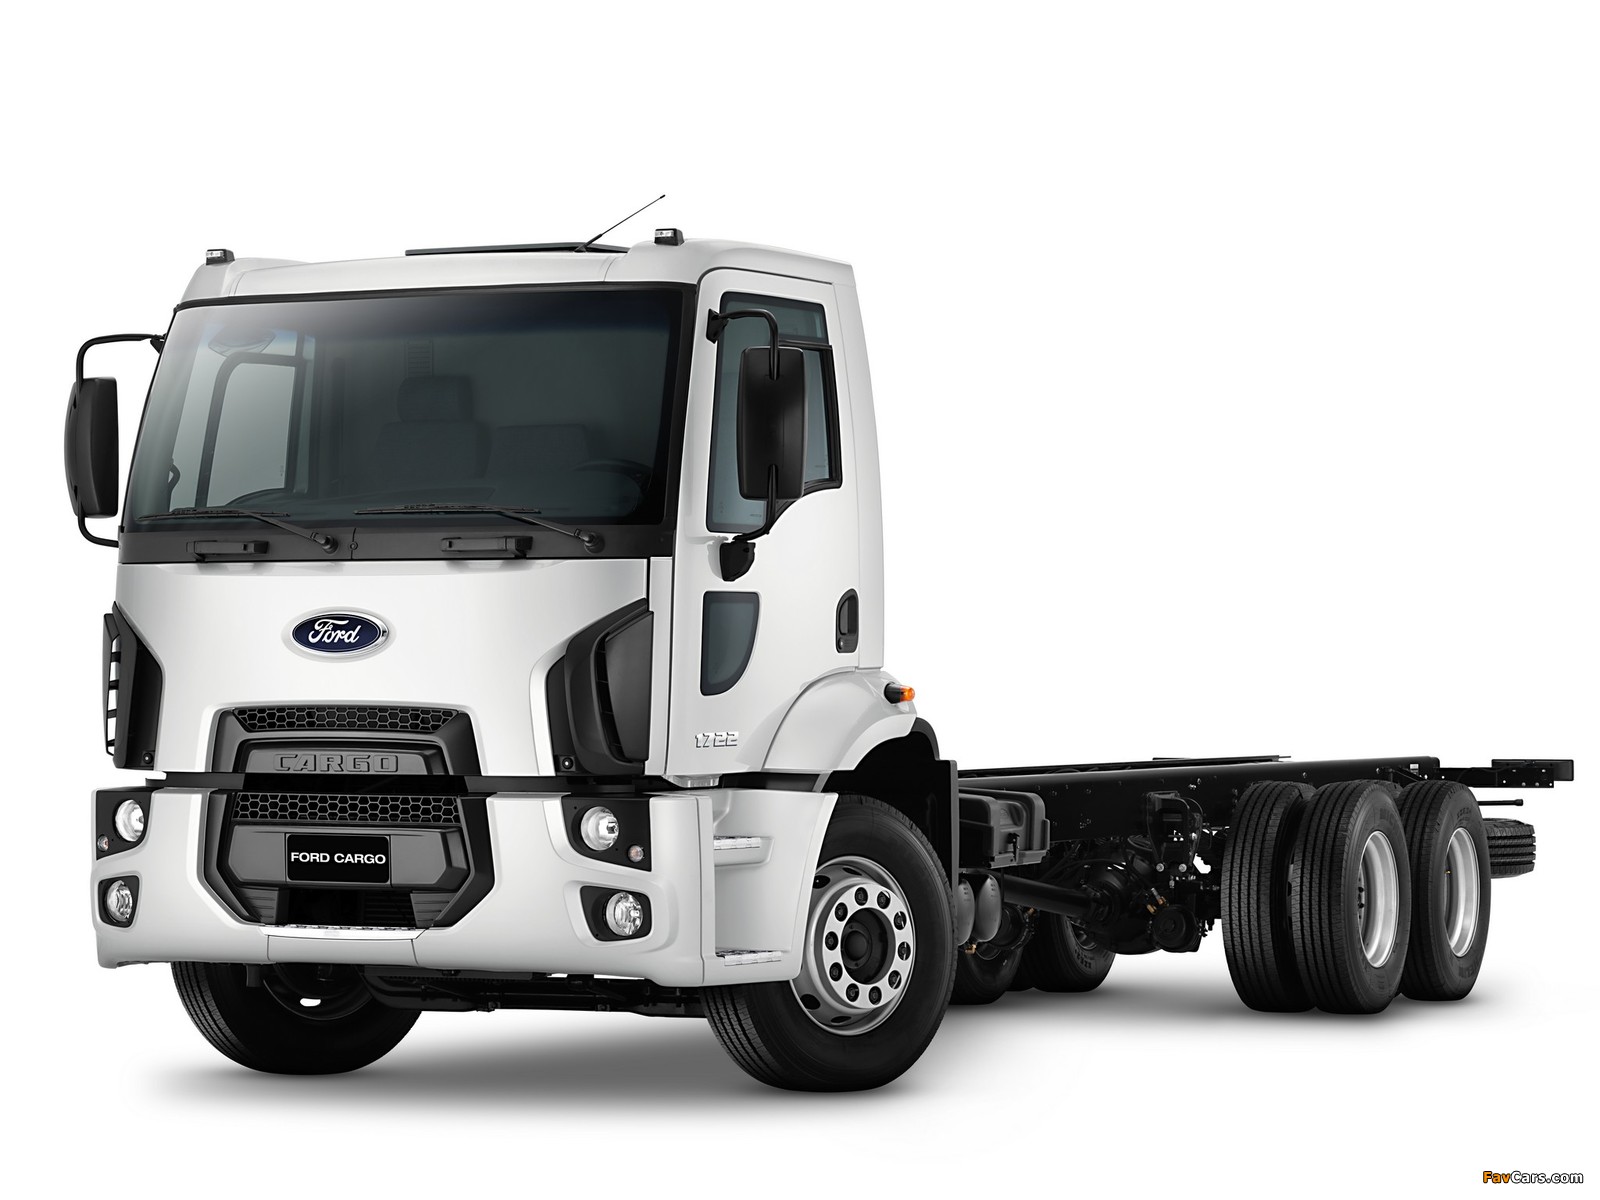 Ford Cargo 1722 6x2 2011 pictures (1600 x 1200)